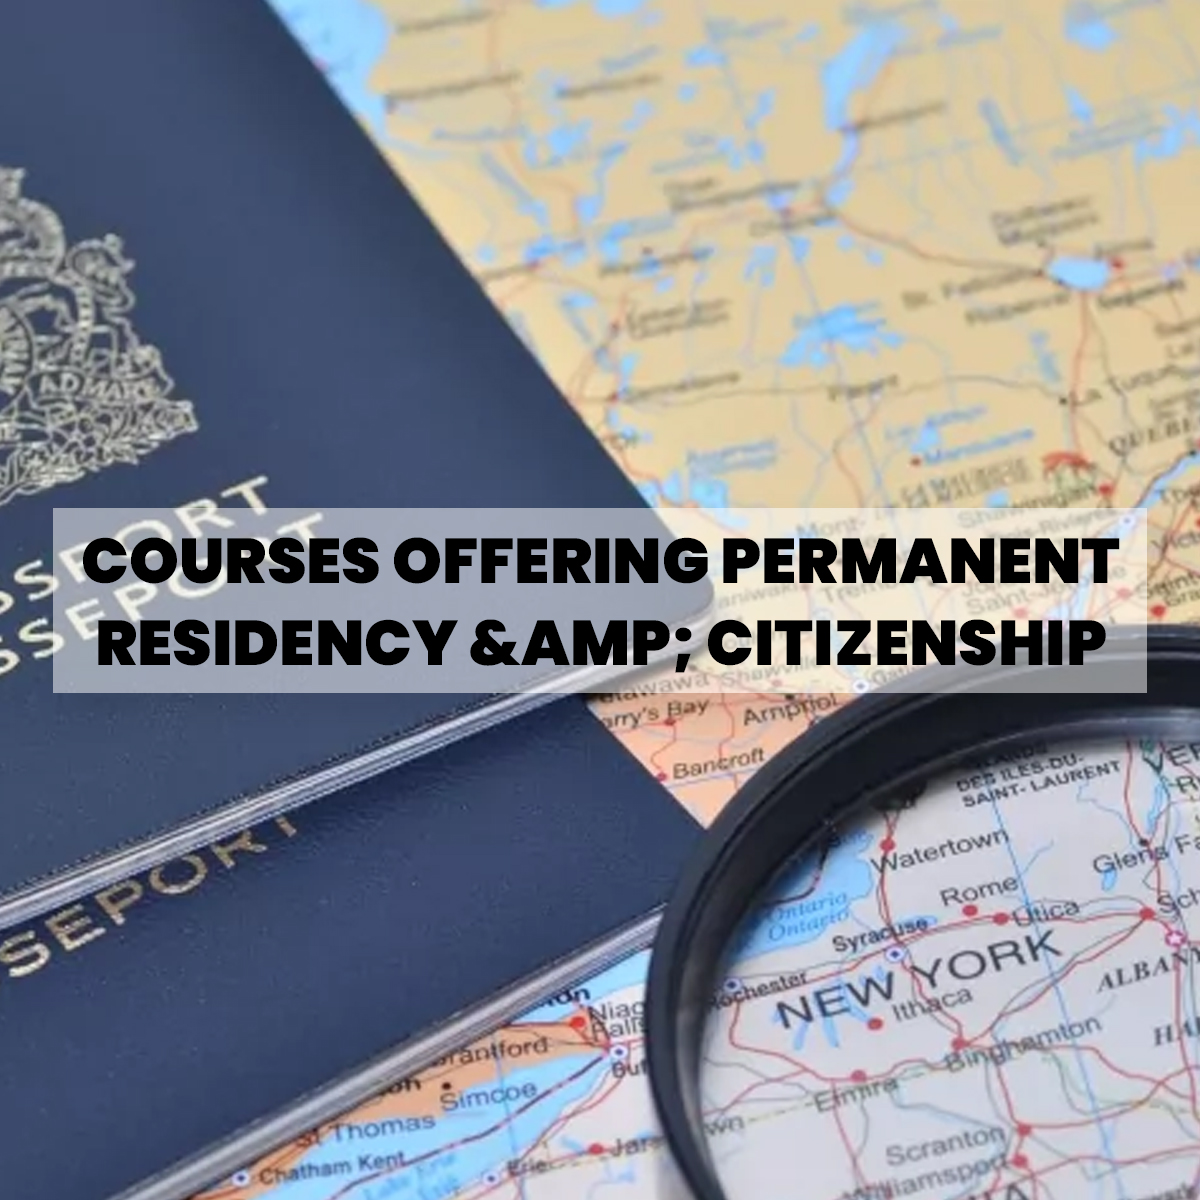 Courses Offering Permanent Residency & Citizenship - Study Abroad